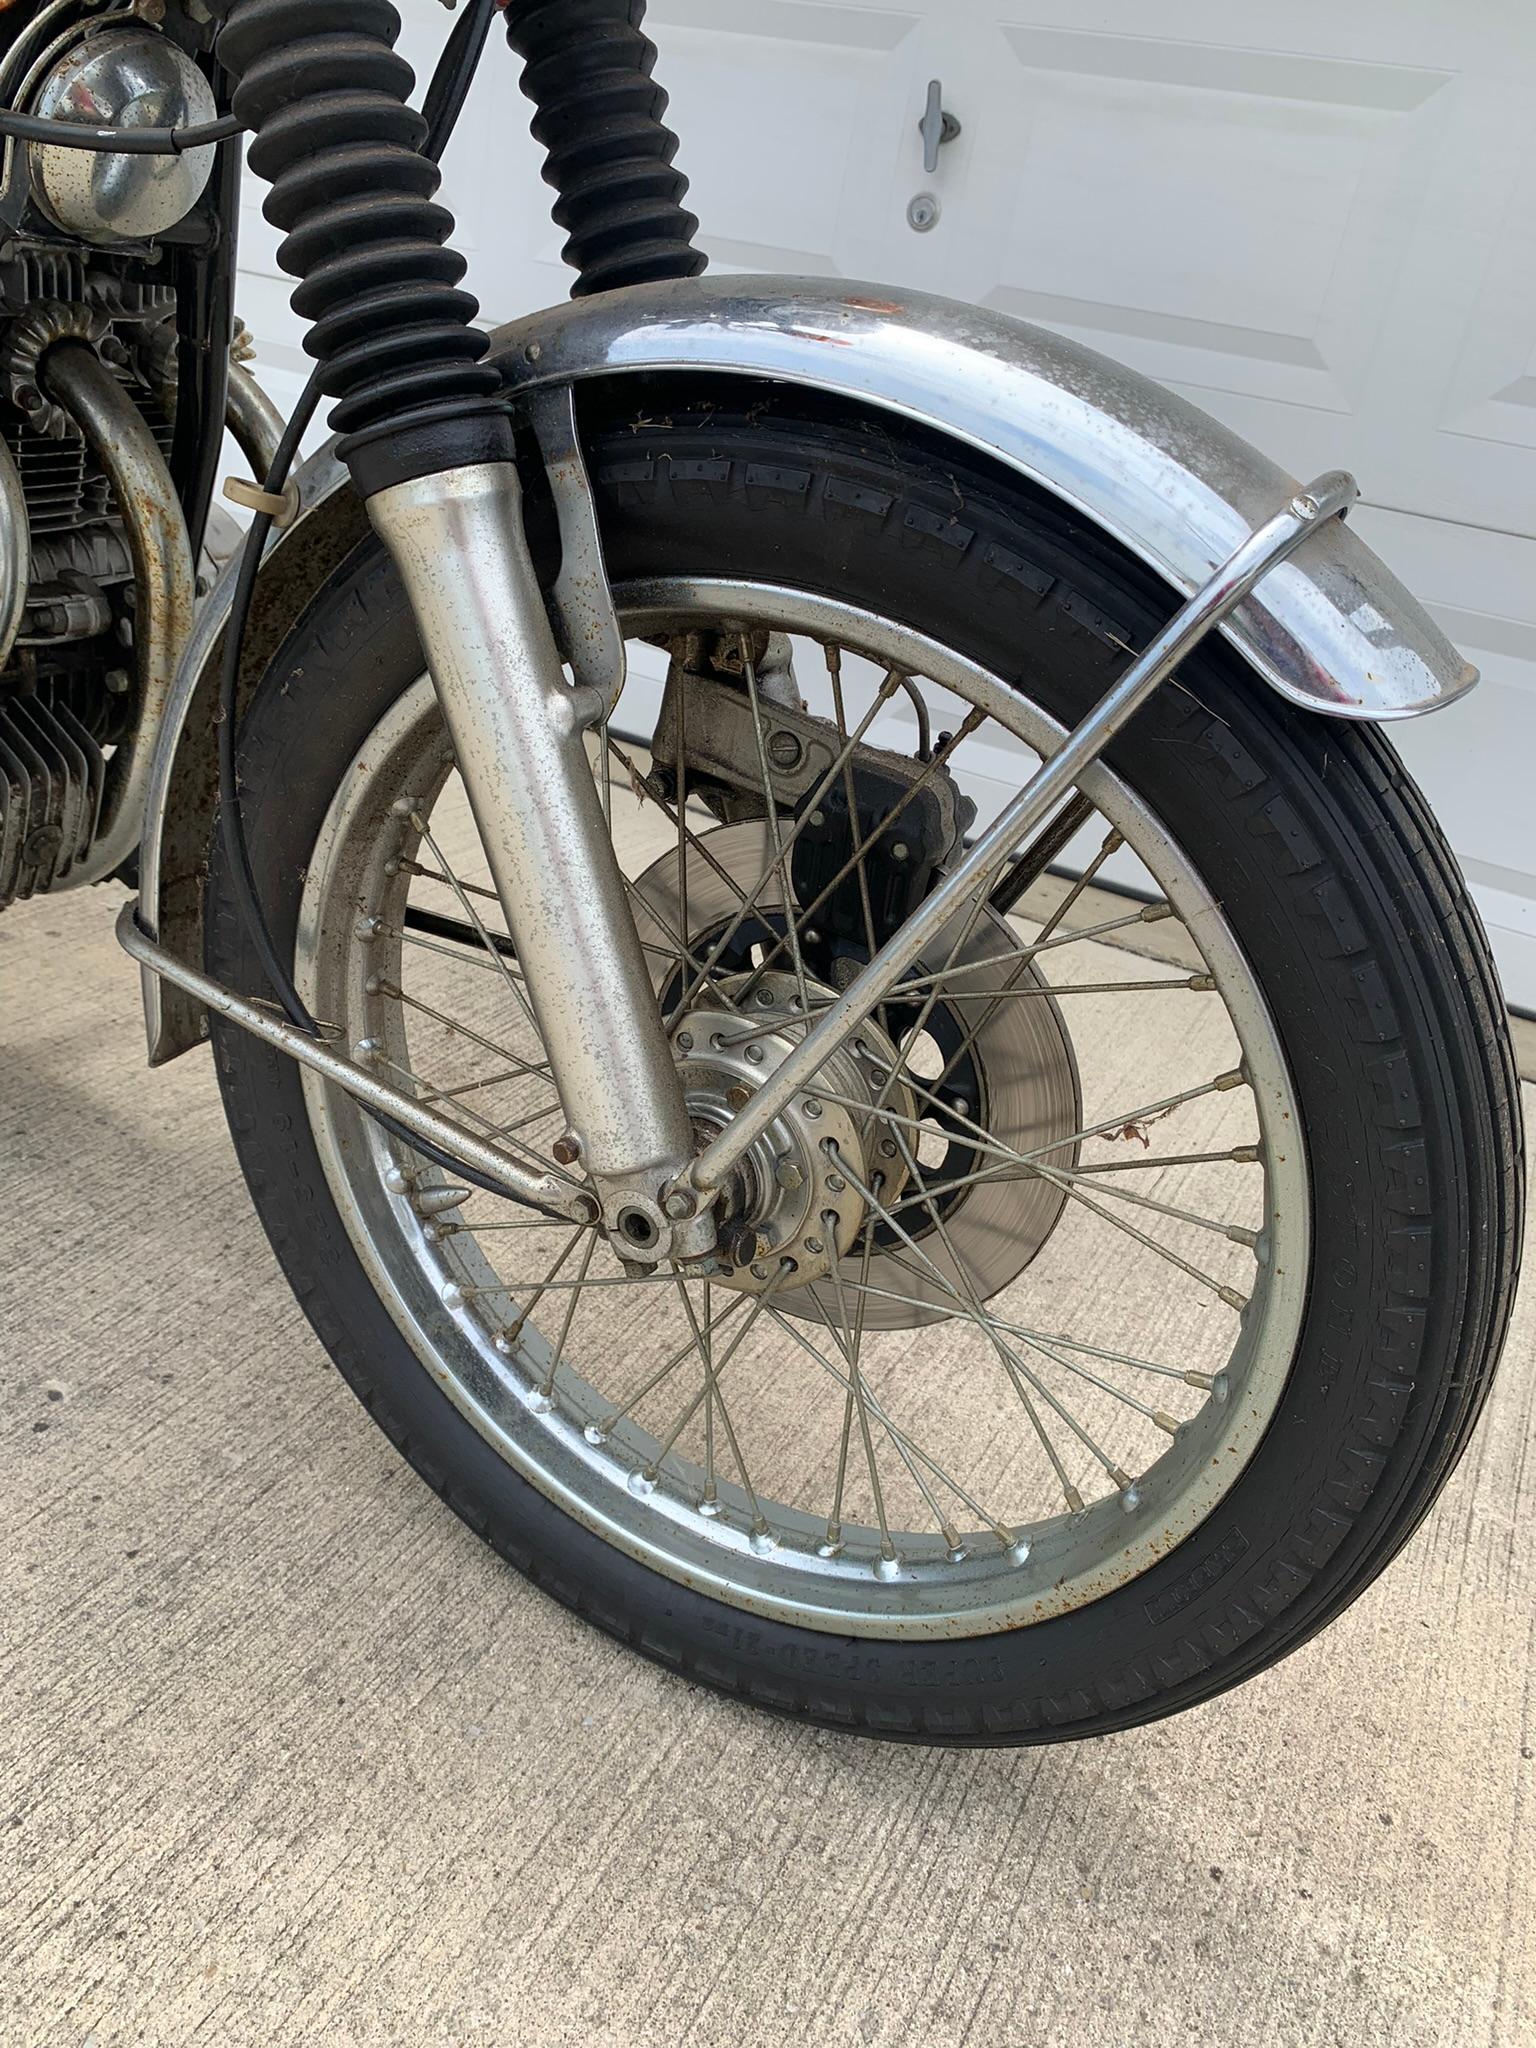 1972 Honda 500 Four, Very Clean, One Owner. Very Low Miles  3147.4